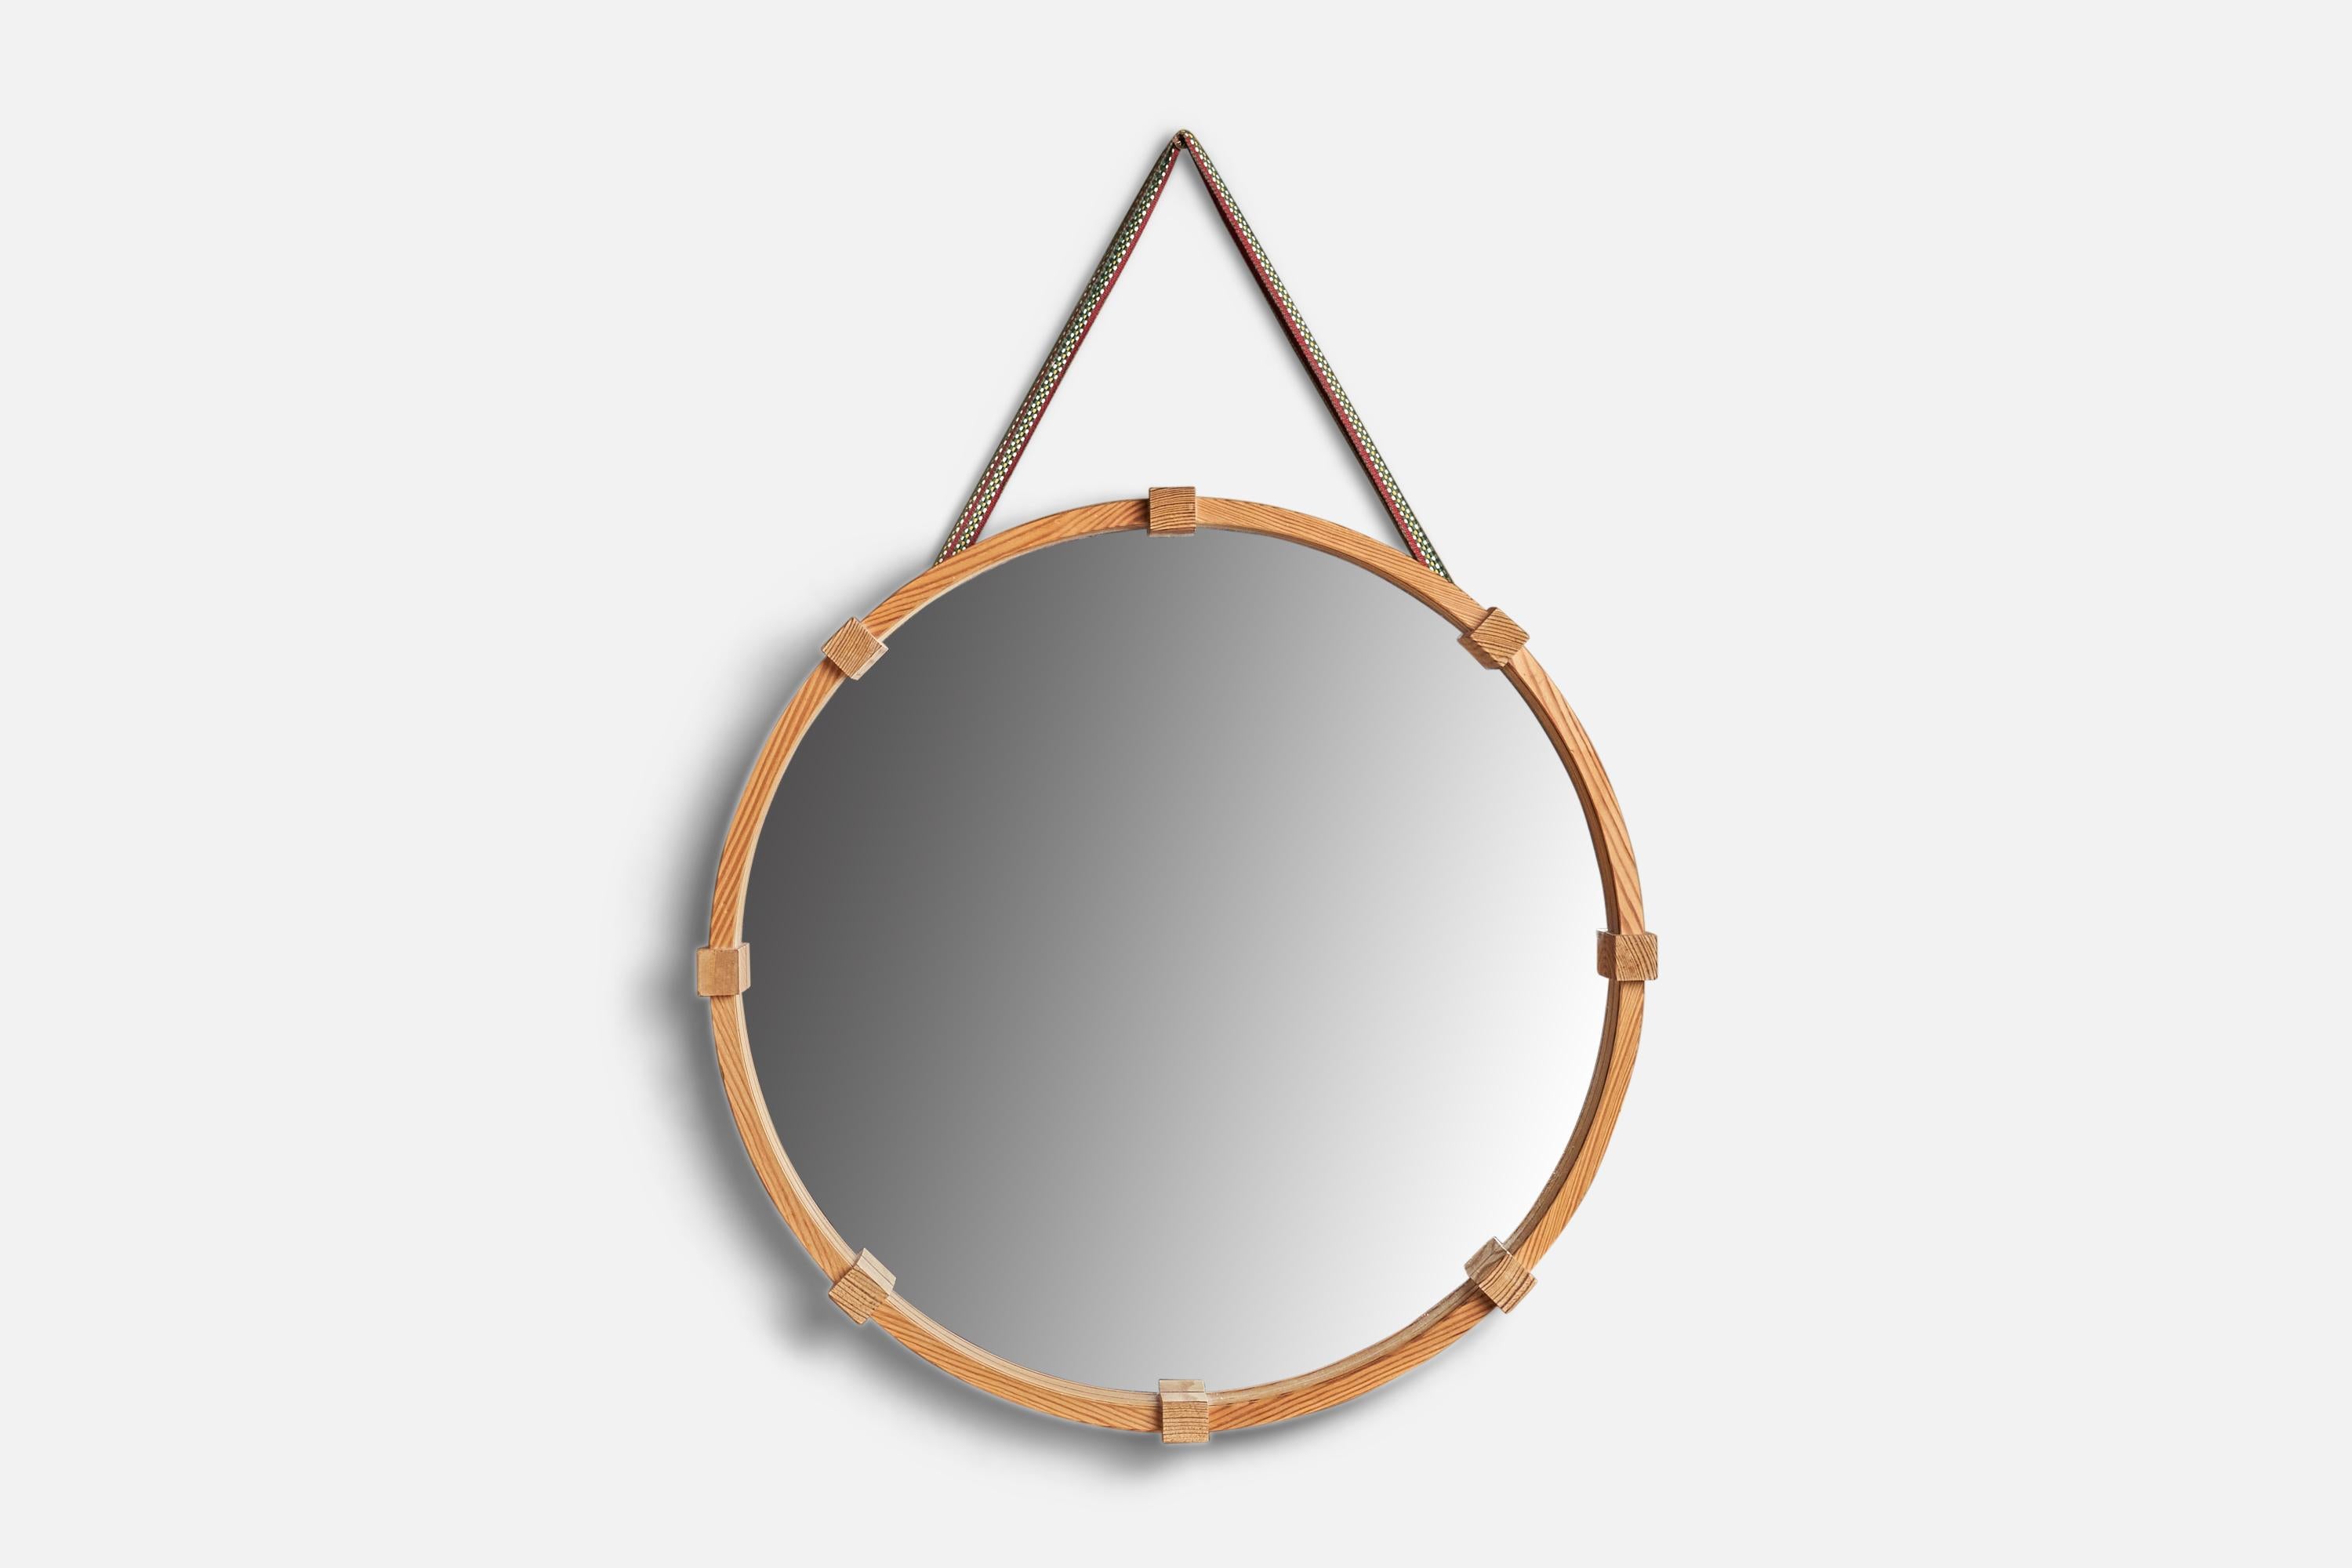 A pine wall mirror designed and produced in Sweden, c. 1970s.